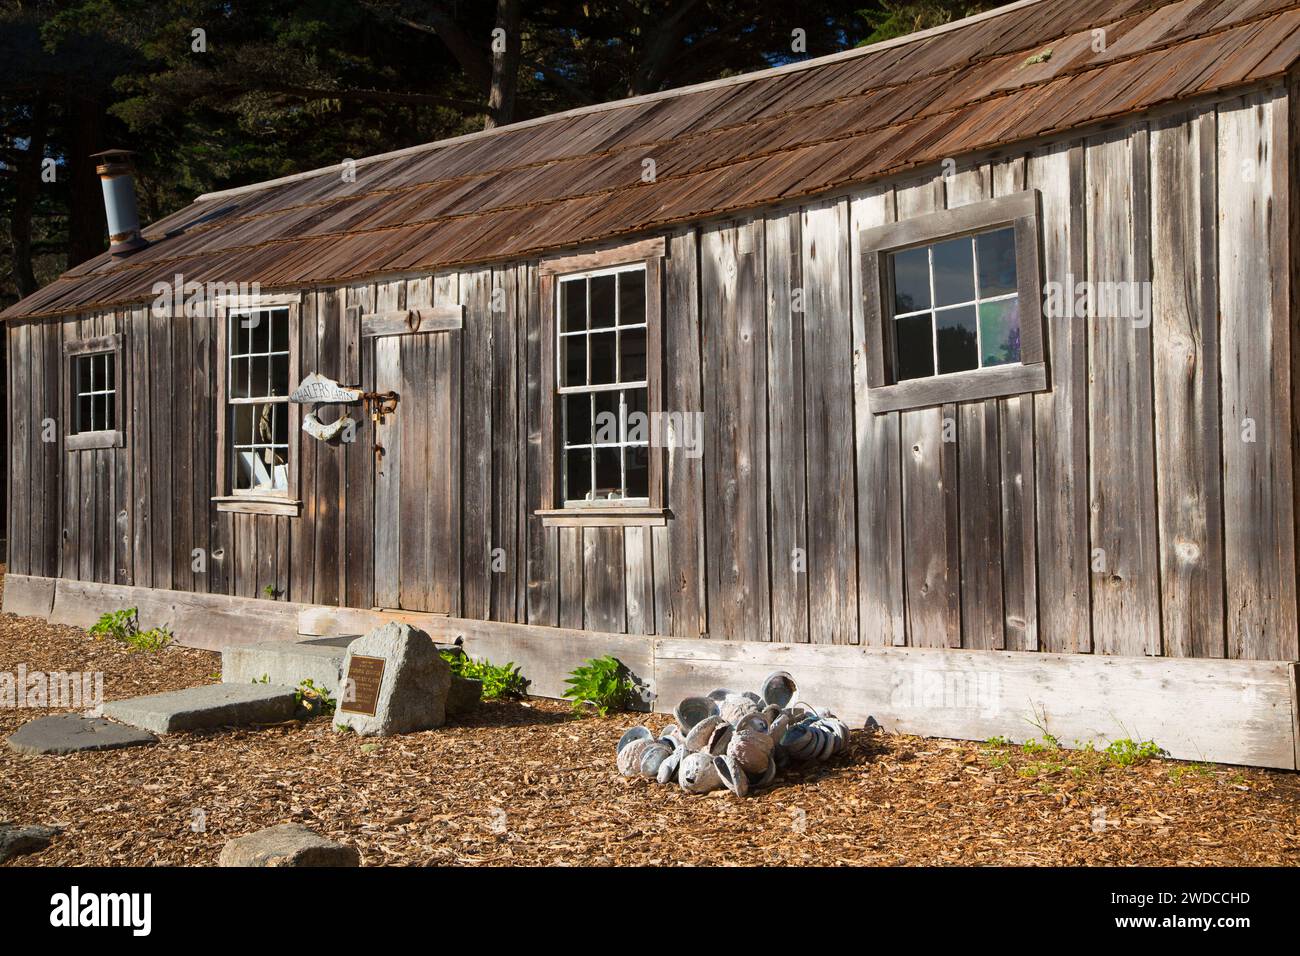 The Whalers Cabin, Point Lobos State Reserve, Big Sur Coast Highway Scenic Byway, California Stock Photo